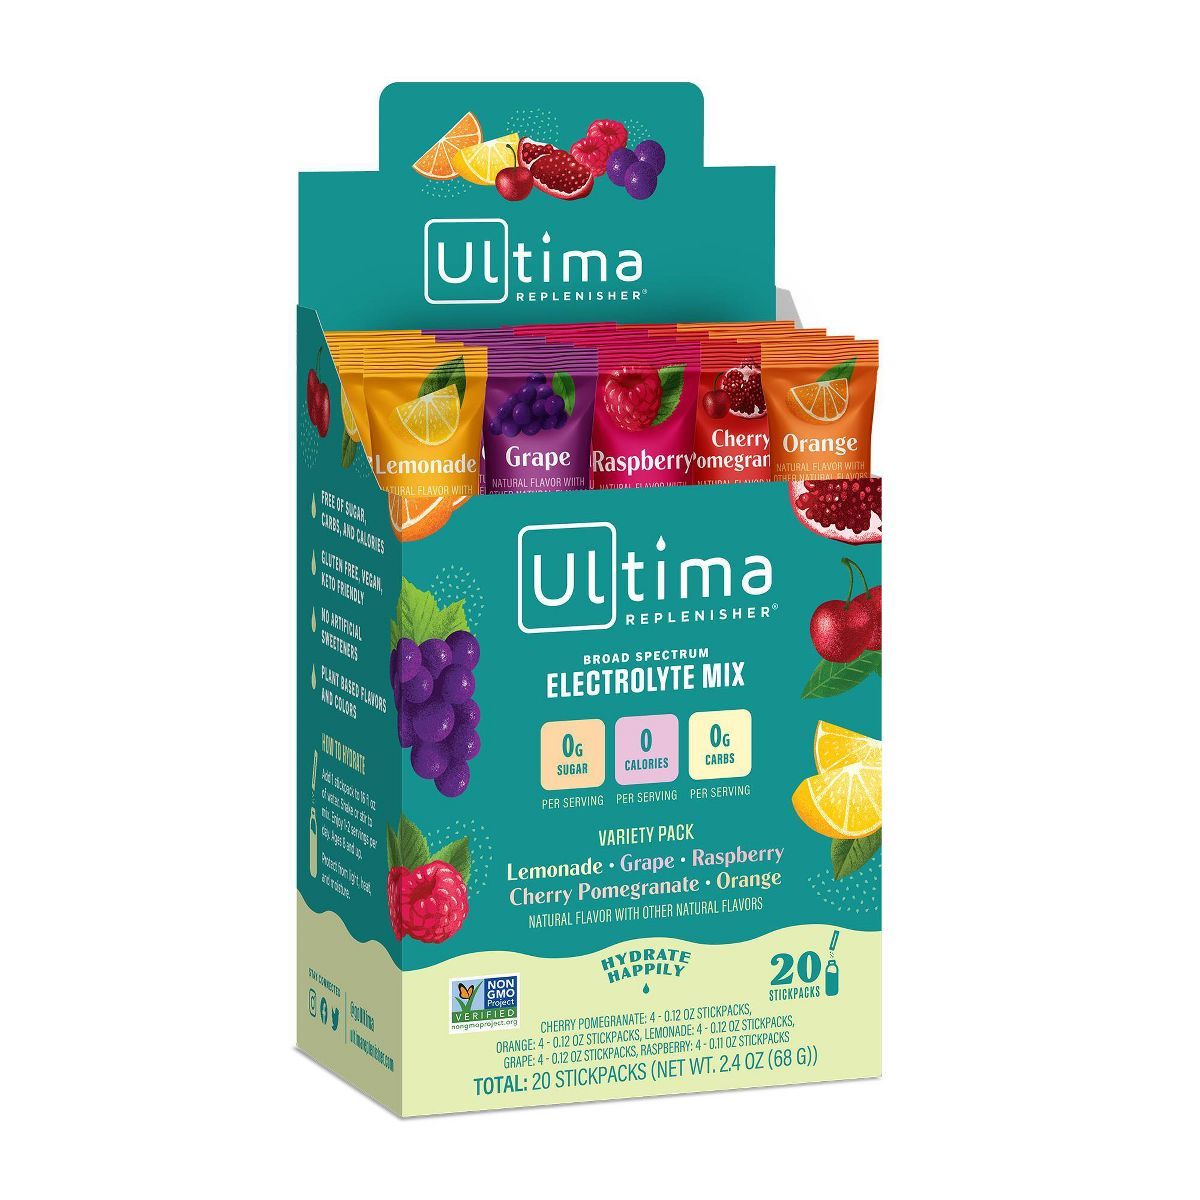 Ultima Replenisher Electrolyte Supplements Variety Pack Box - 20ct | Target